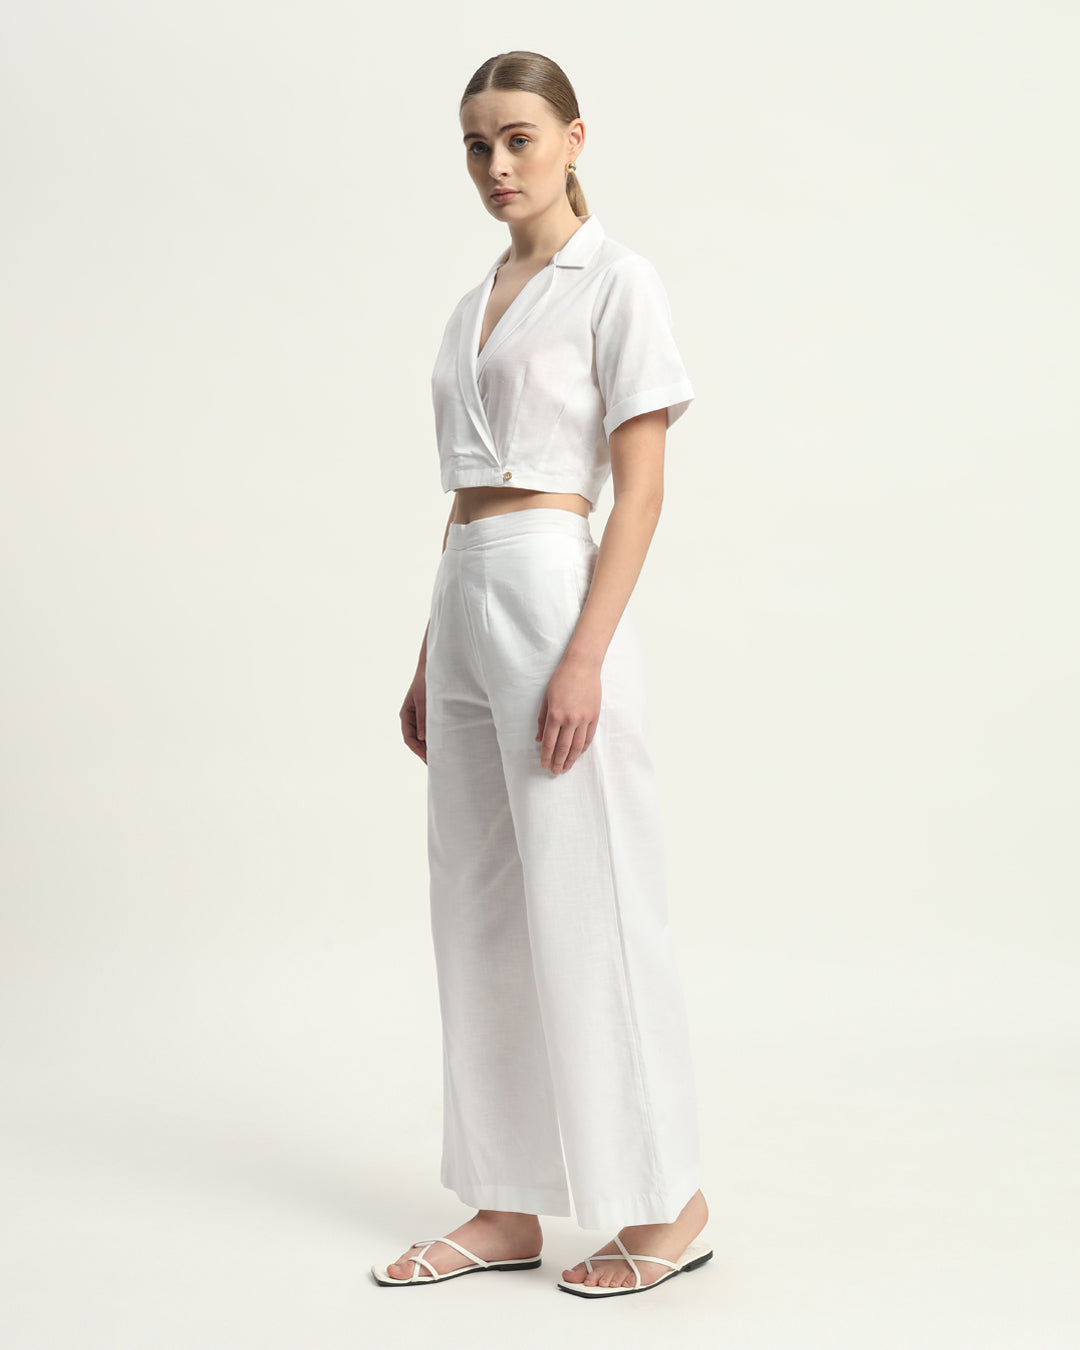 Lapel Collar White Linen Top (Without Bottoms)